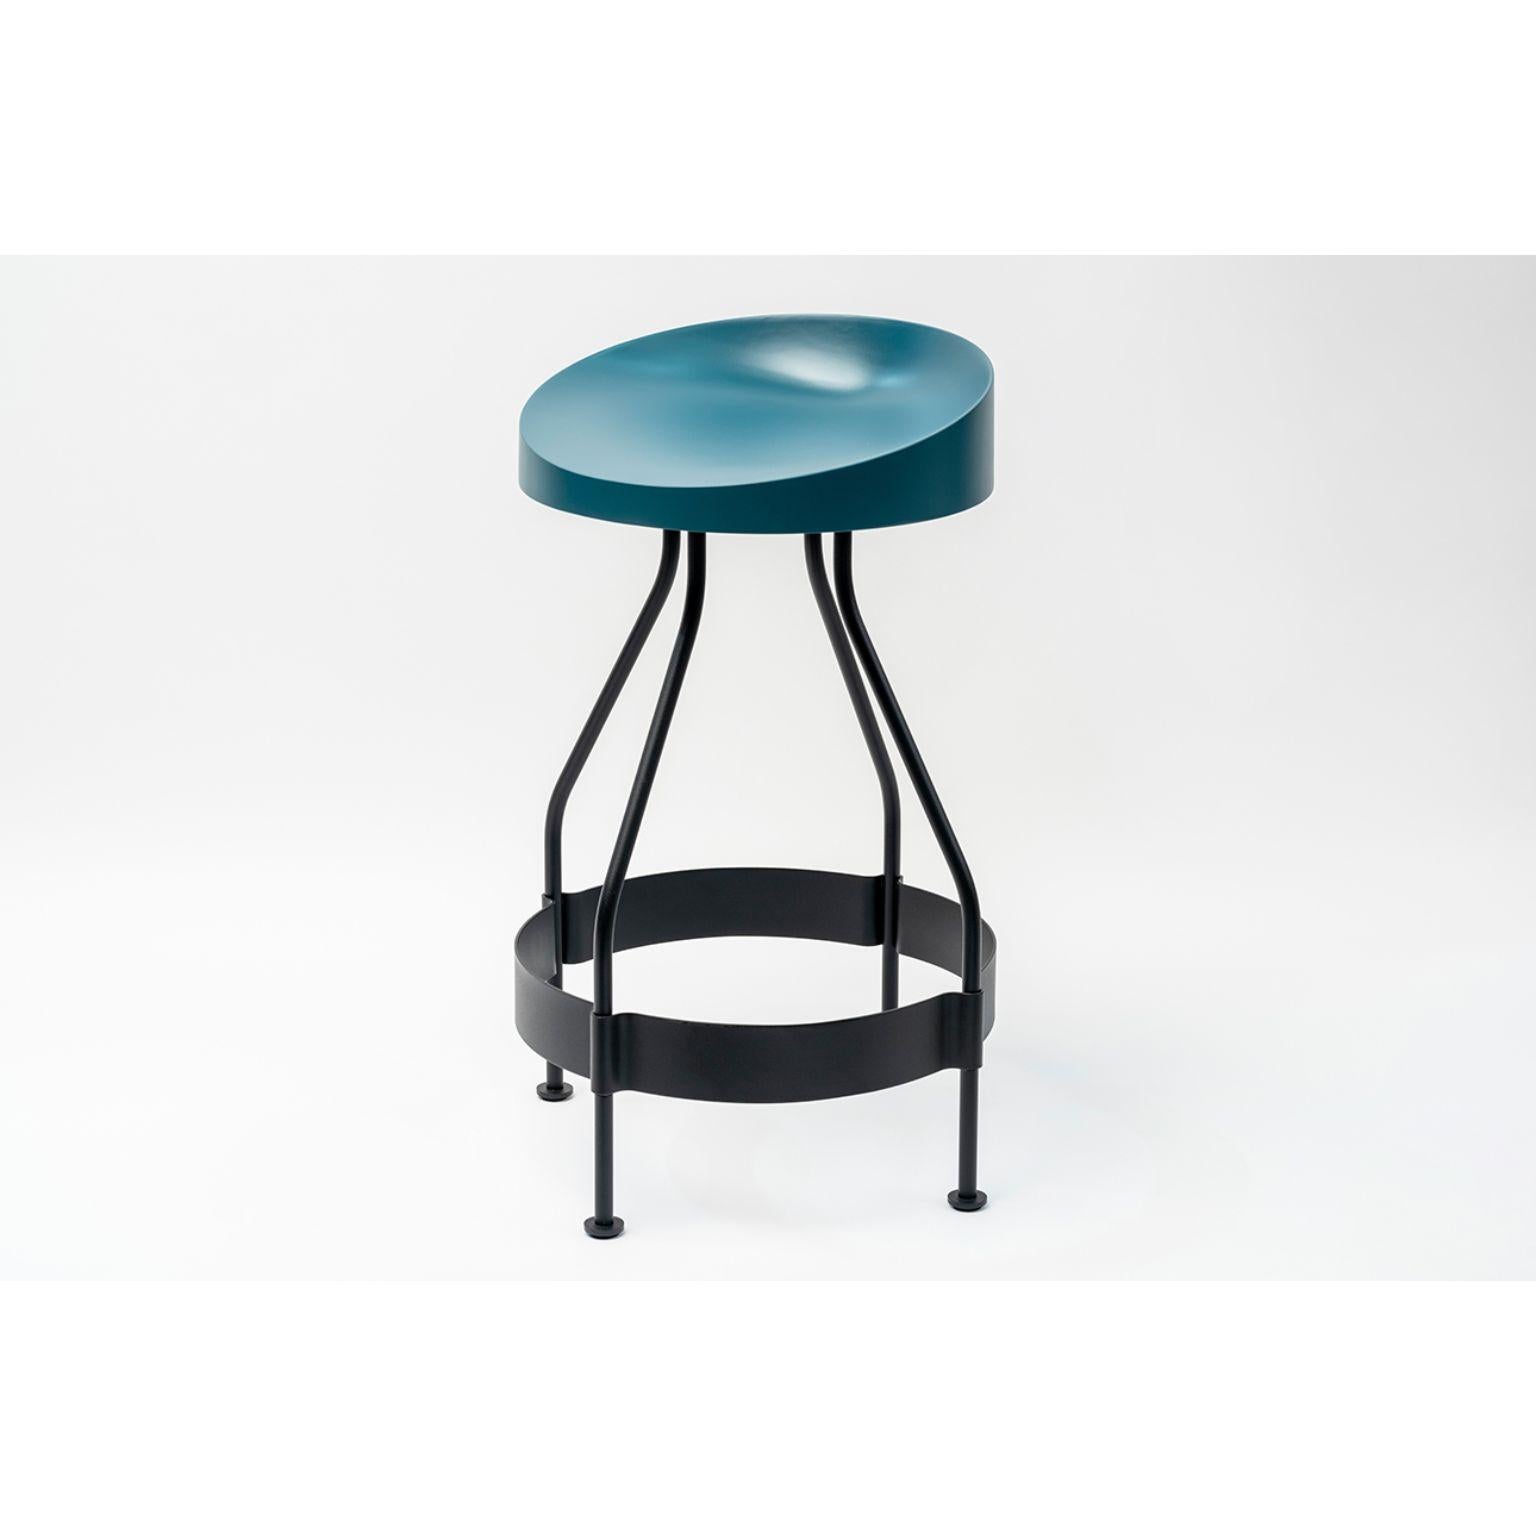 Olindias bar stool by Luca Nichetto
Materials: Shell: Dark green NCS 8010 B70G/Coral NCS 2570 Y70R/ Duck Blue NCS 6020 B10G/Warm Light 
 NCS 2002 Y50R lacquered Polyurethane
 Structure: Black powder-coated metal
Dimensions: W 48.2 x D 48.2 x H